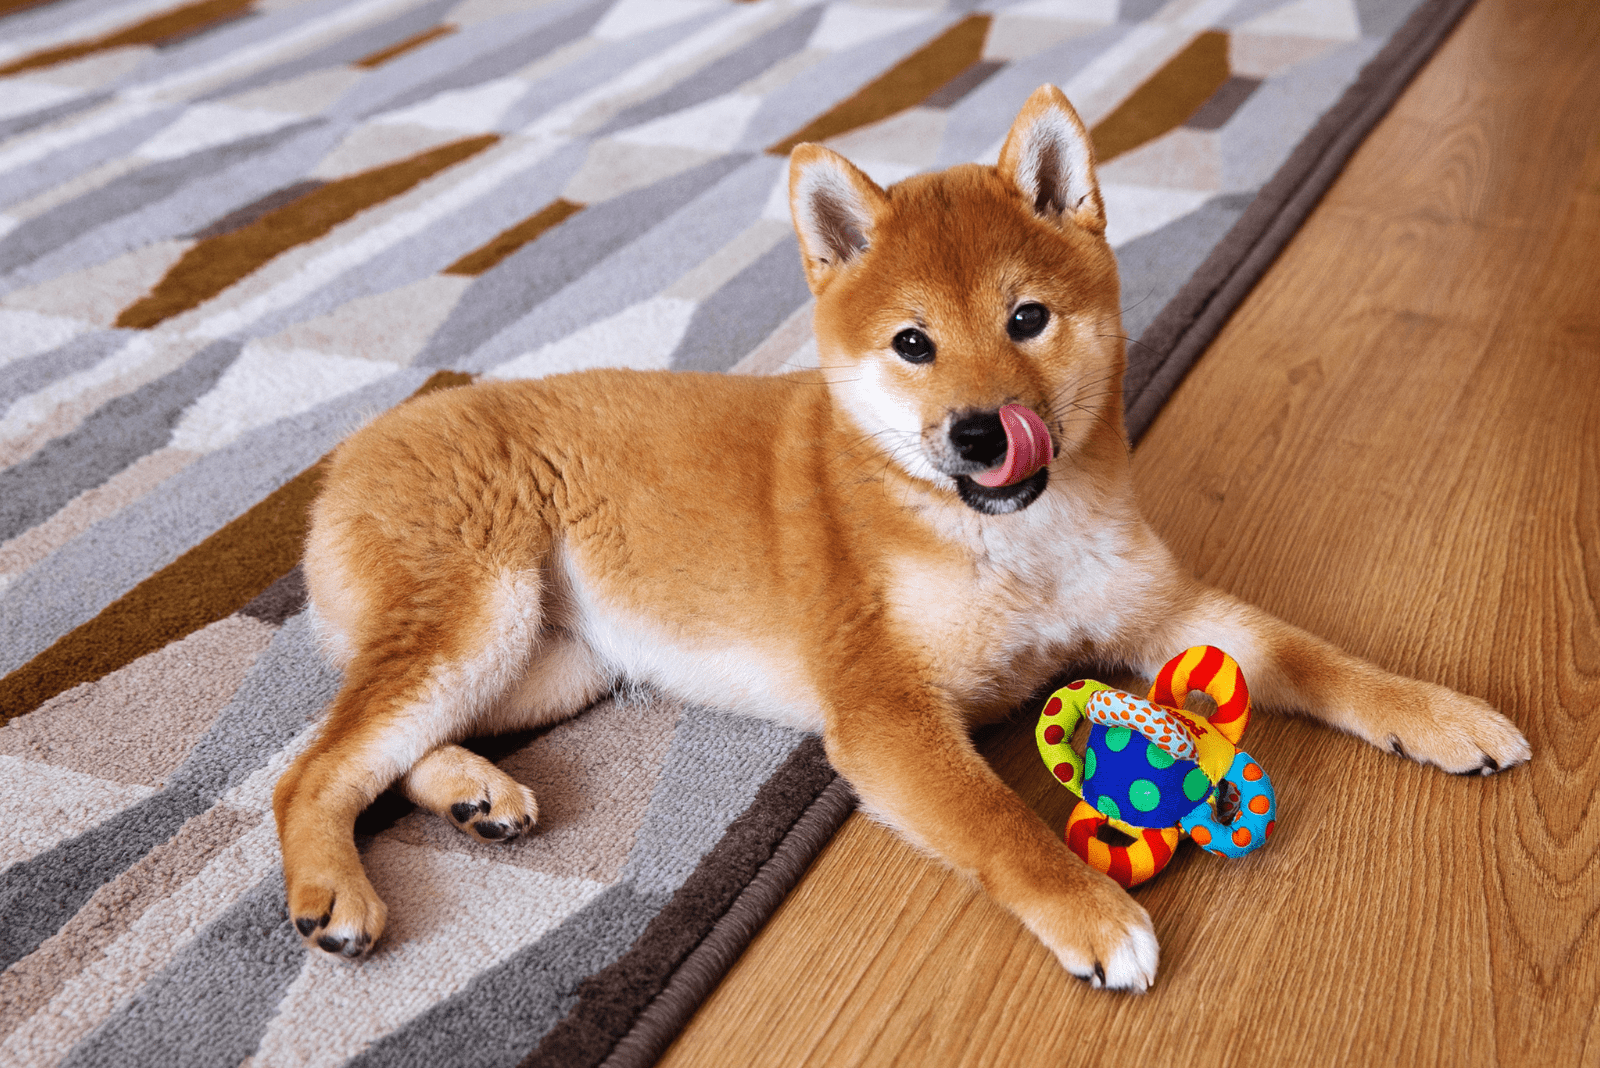 Shiba Inu lies on the floor next to the toy